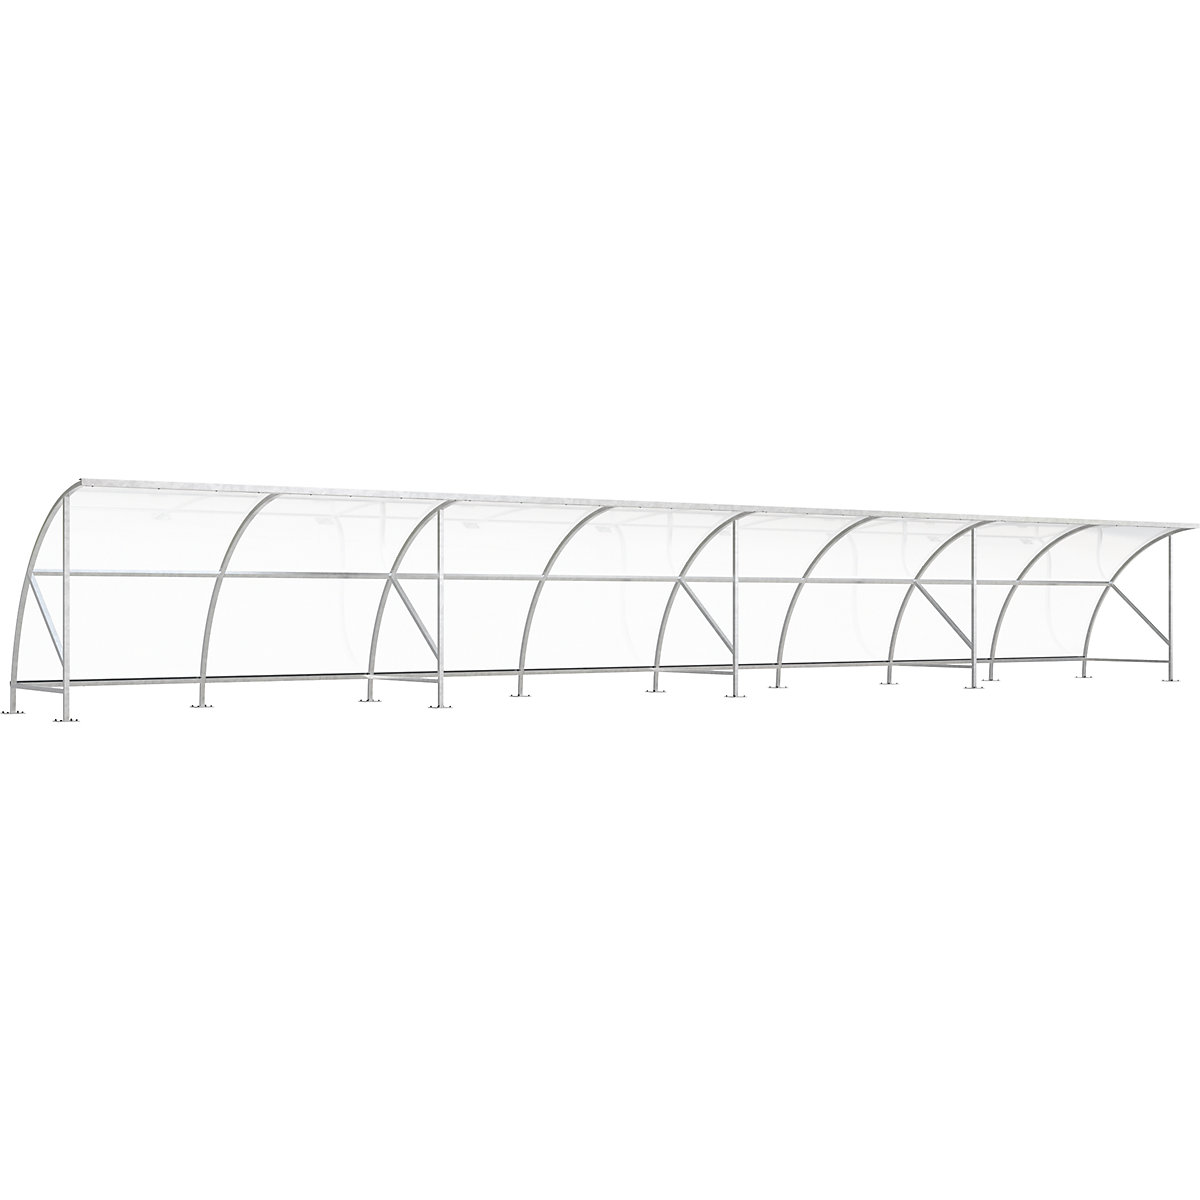 Bicycle shelter, made of polycarbonate, WxD 16450 x 2100 mm, silver-6